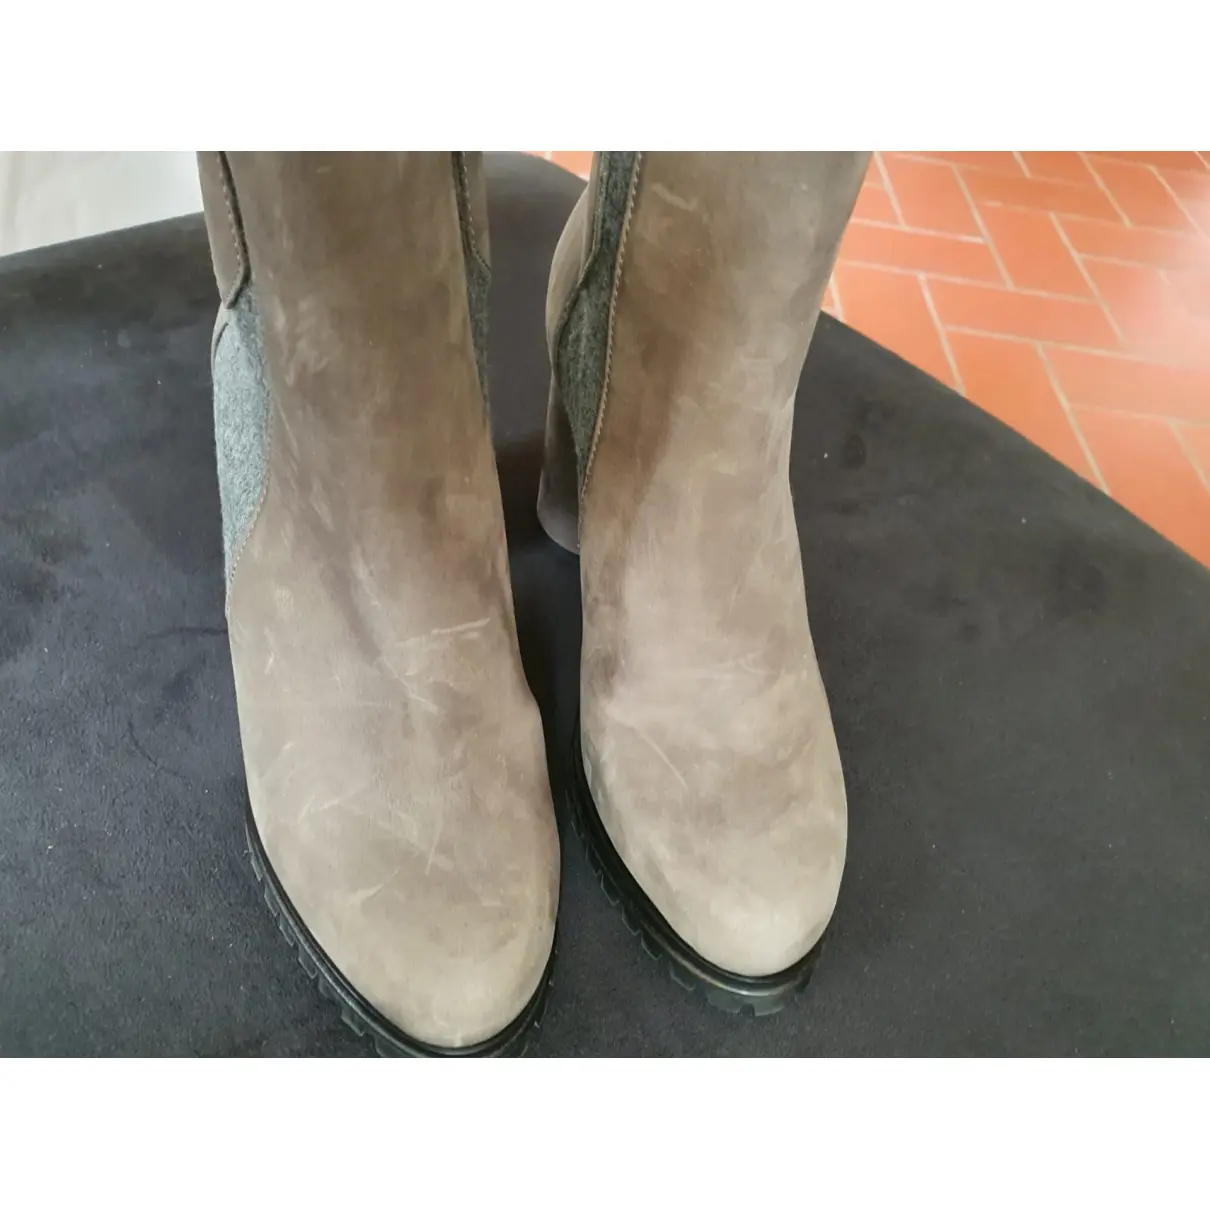 Buy Max Mara Leather ankle boots online